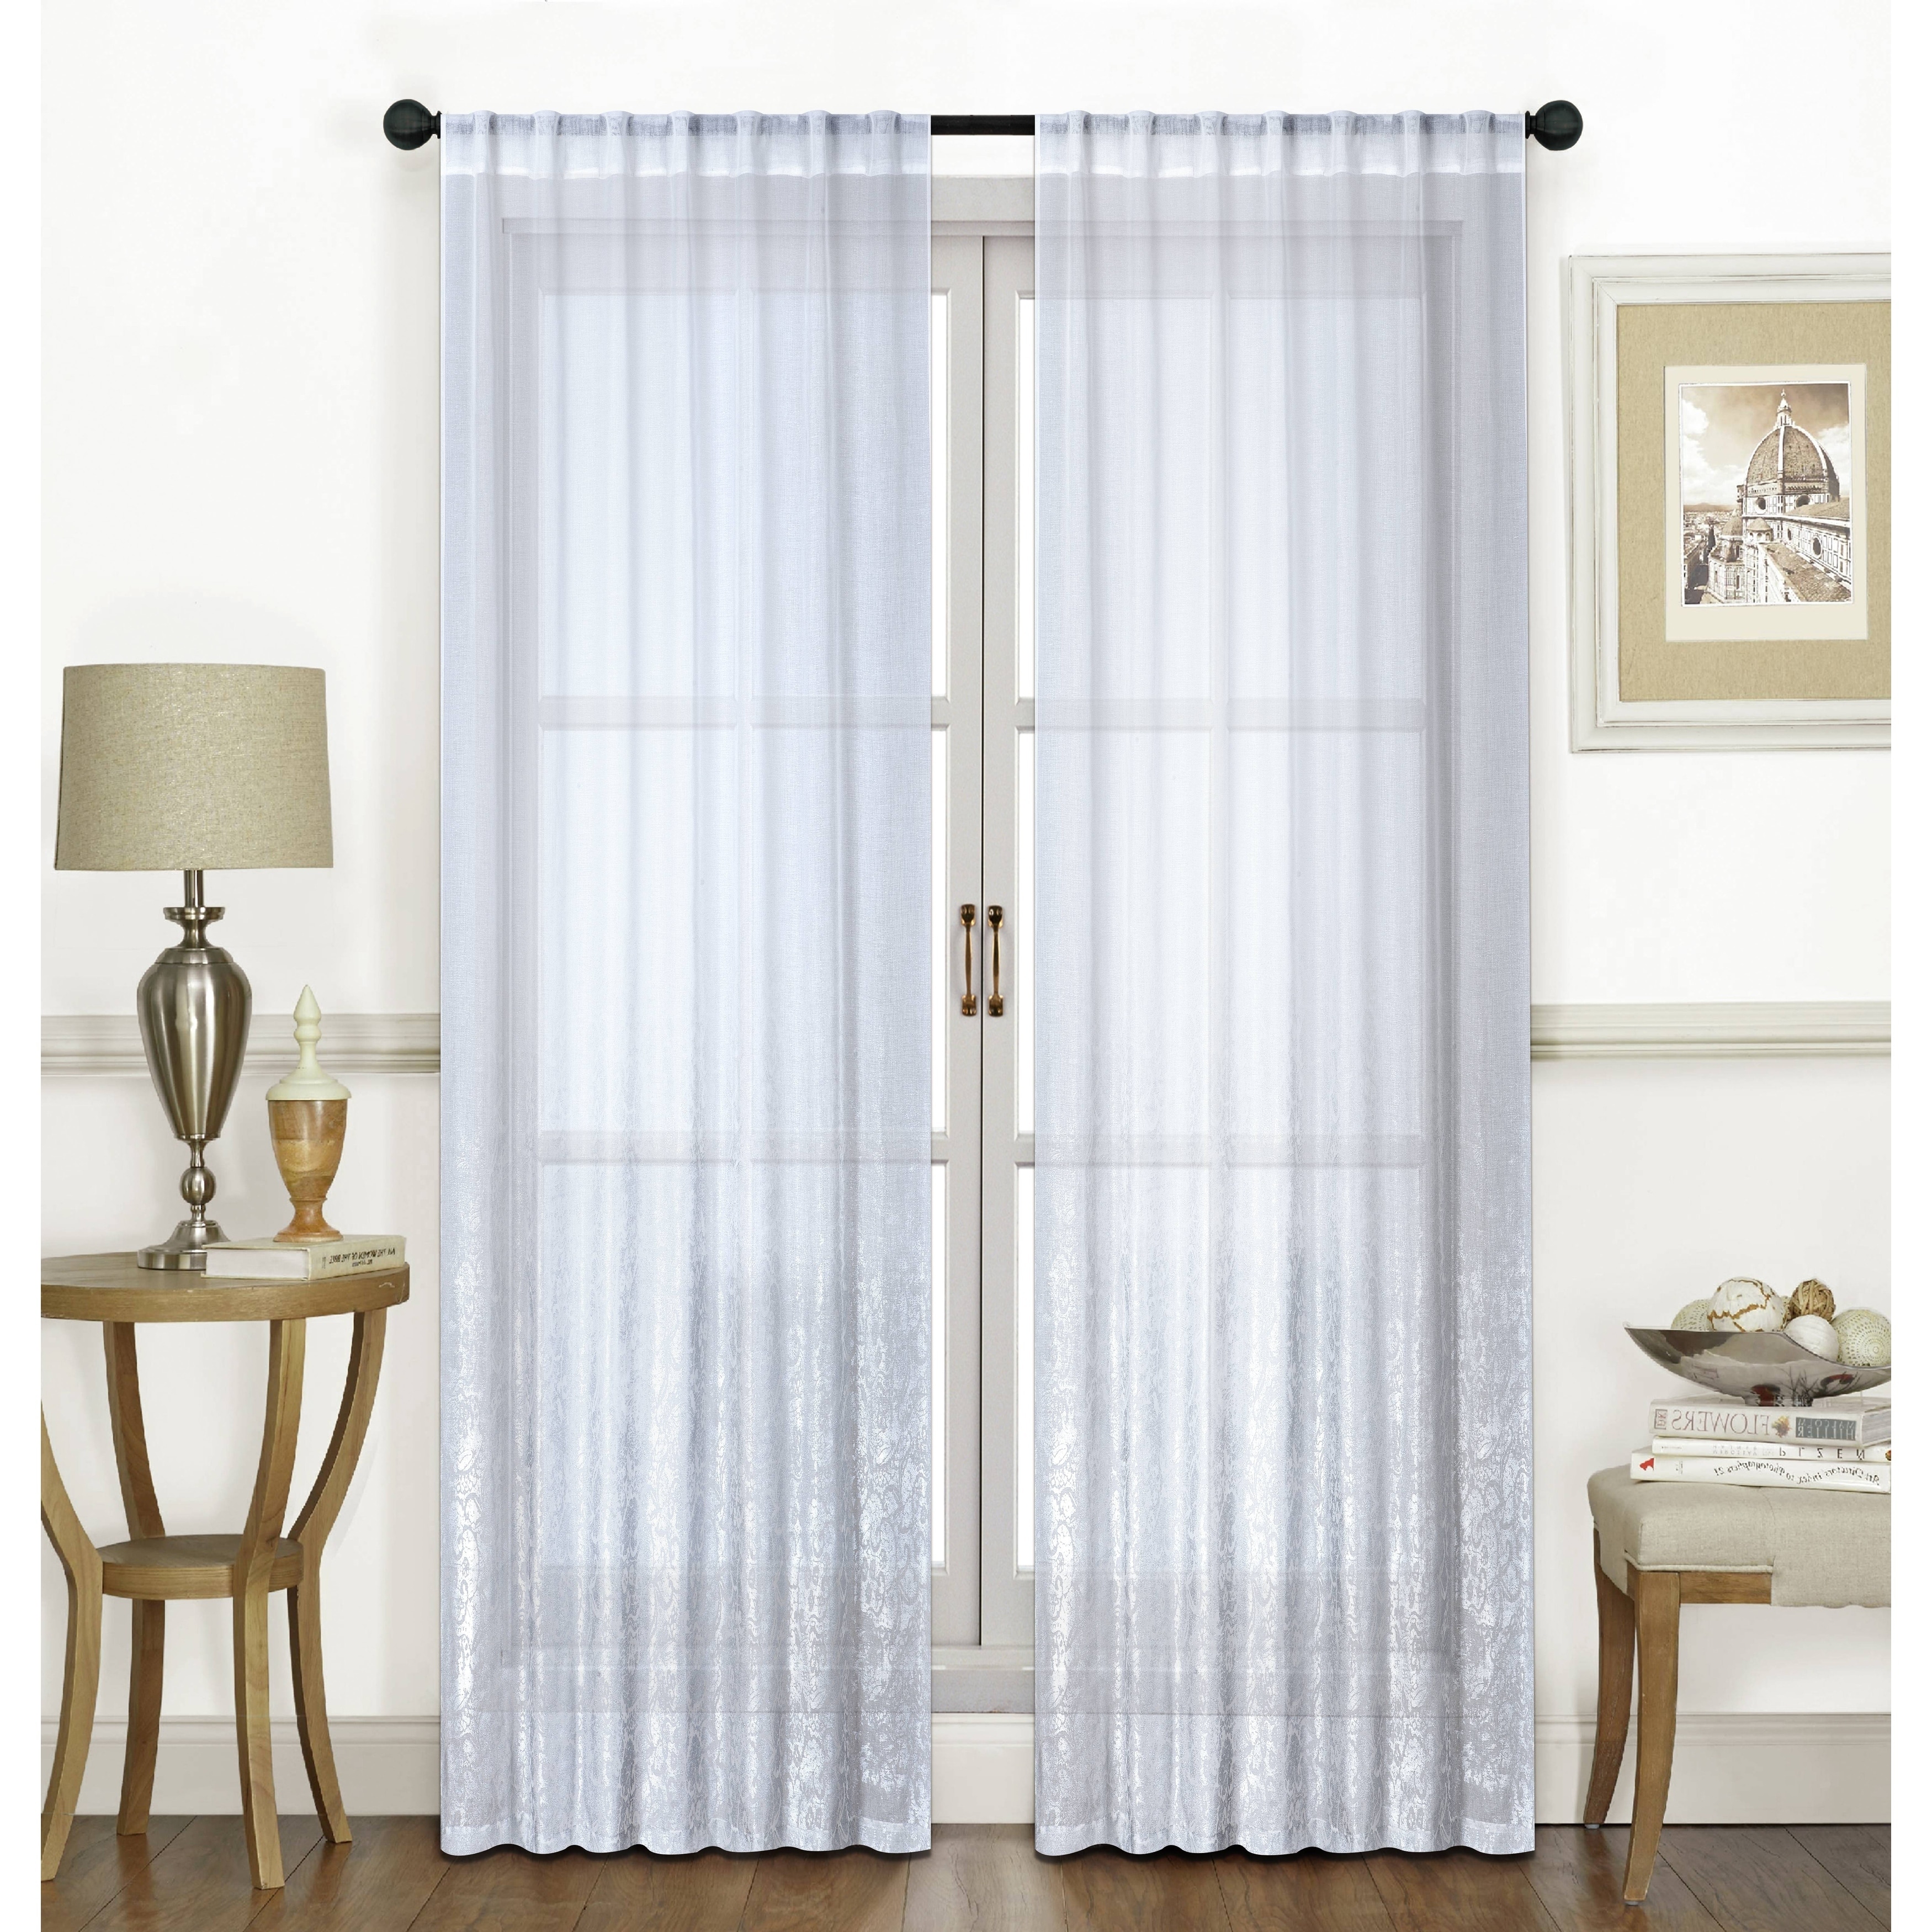 - Dainty Beyond Pair Panel - Rod Window Home Curtain Ombre 19994245 Bath Sheer Bed Pocket Fabric Metallic Lace &